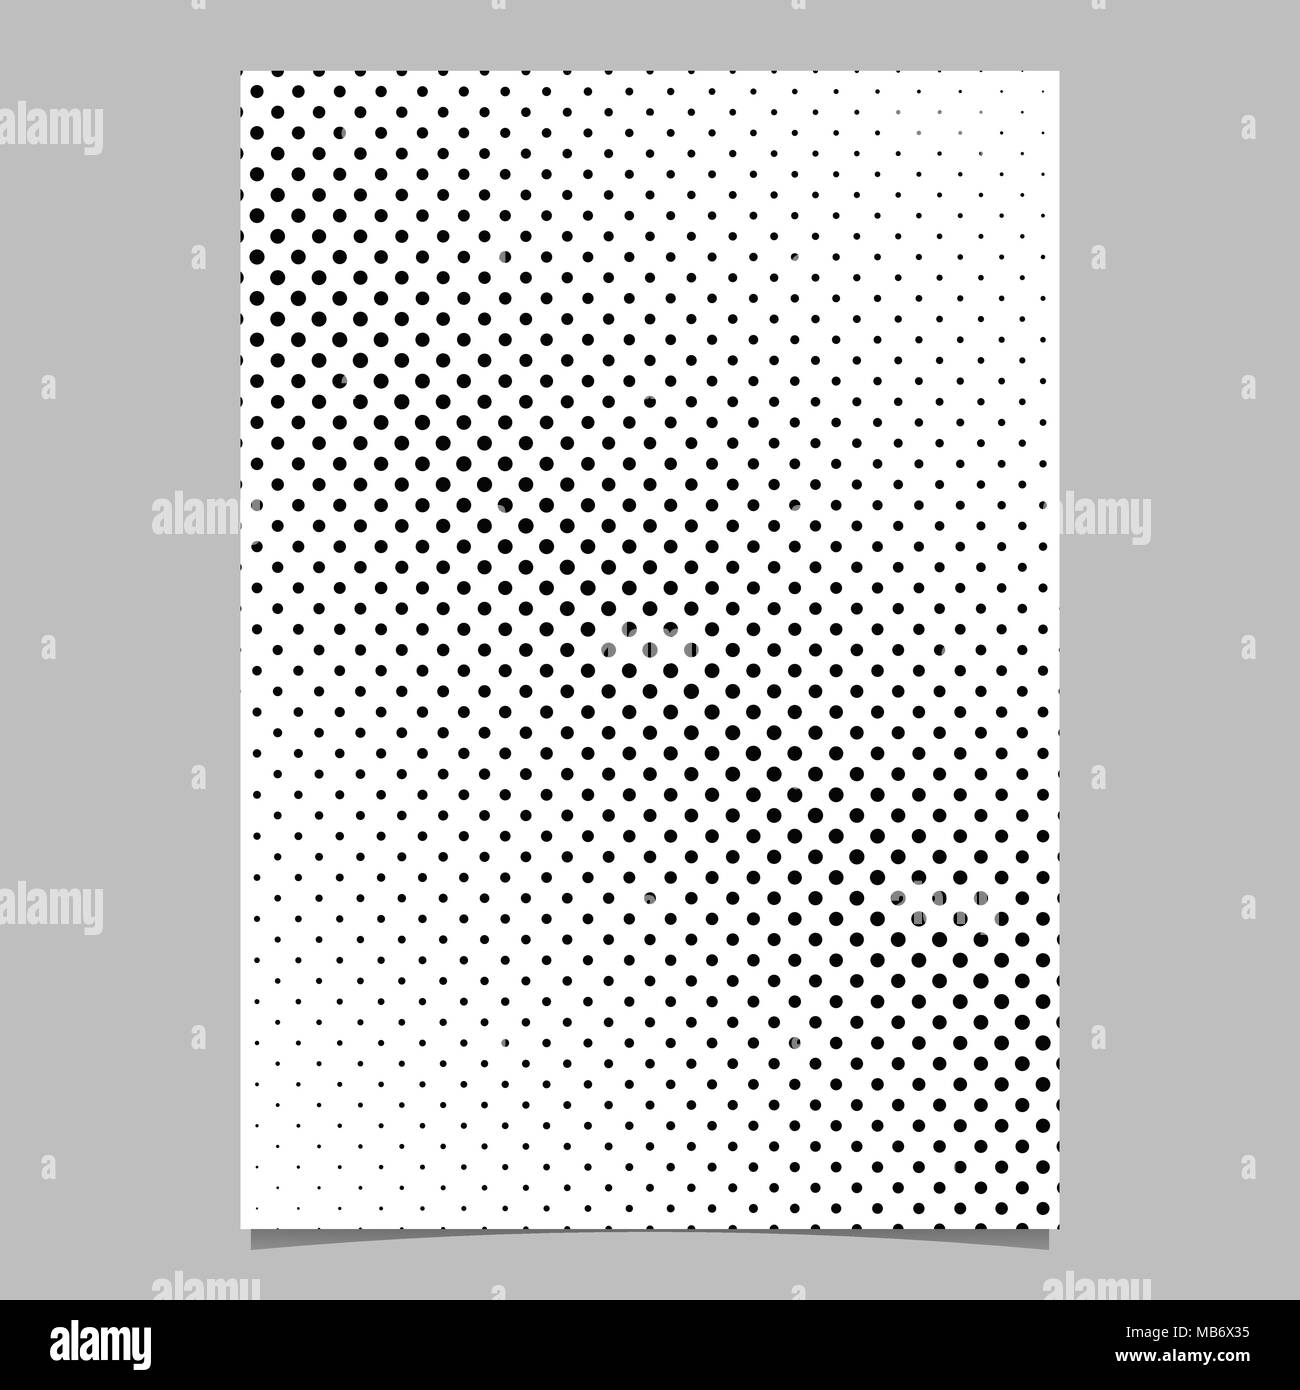 Halftone circle background pattern flyer template from diagonal dots Stock Vector